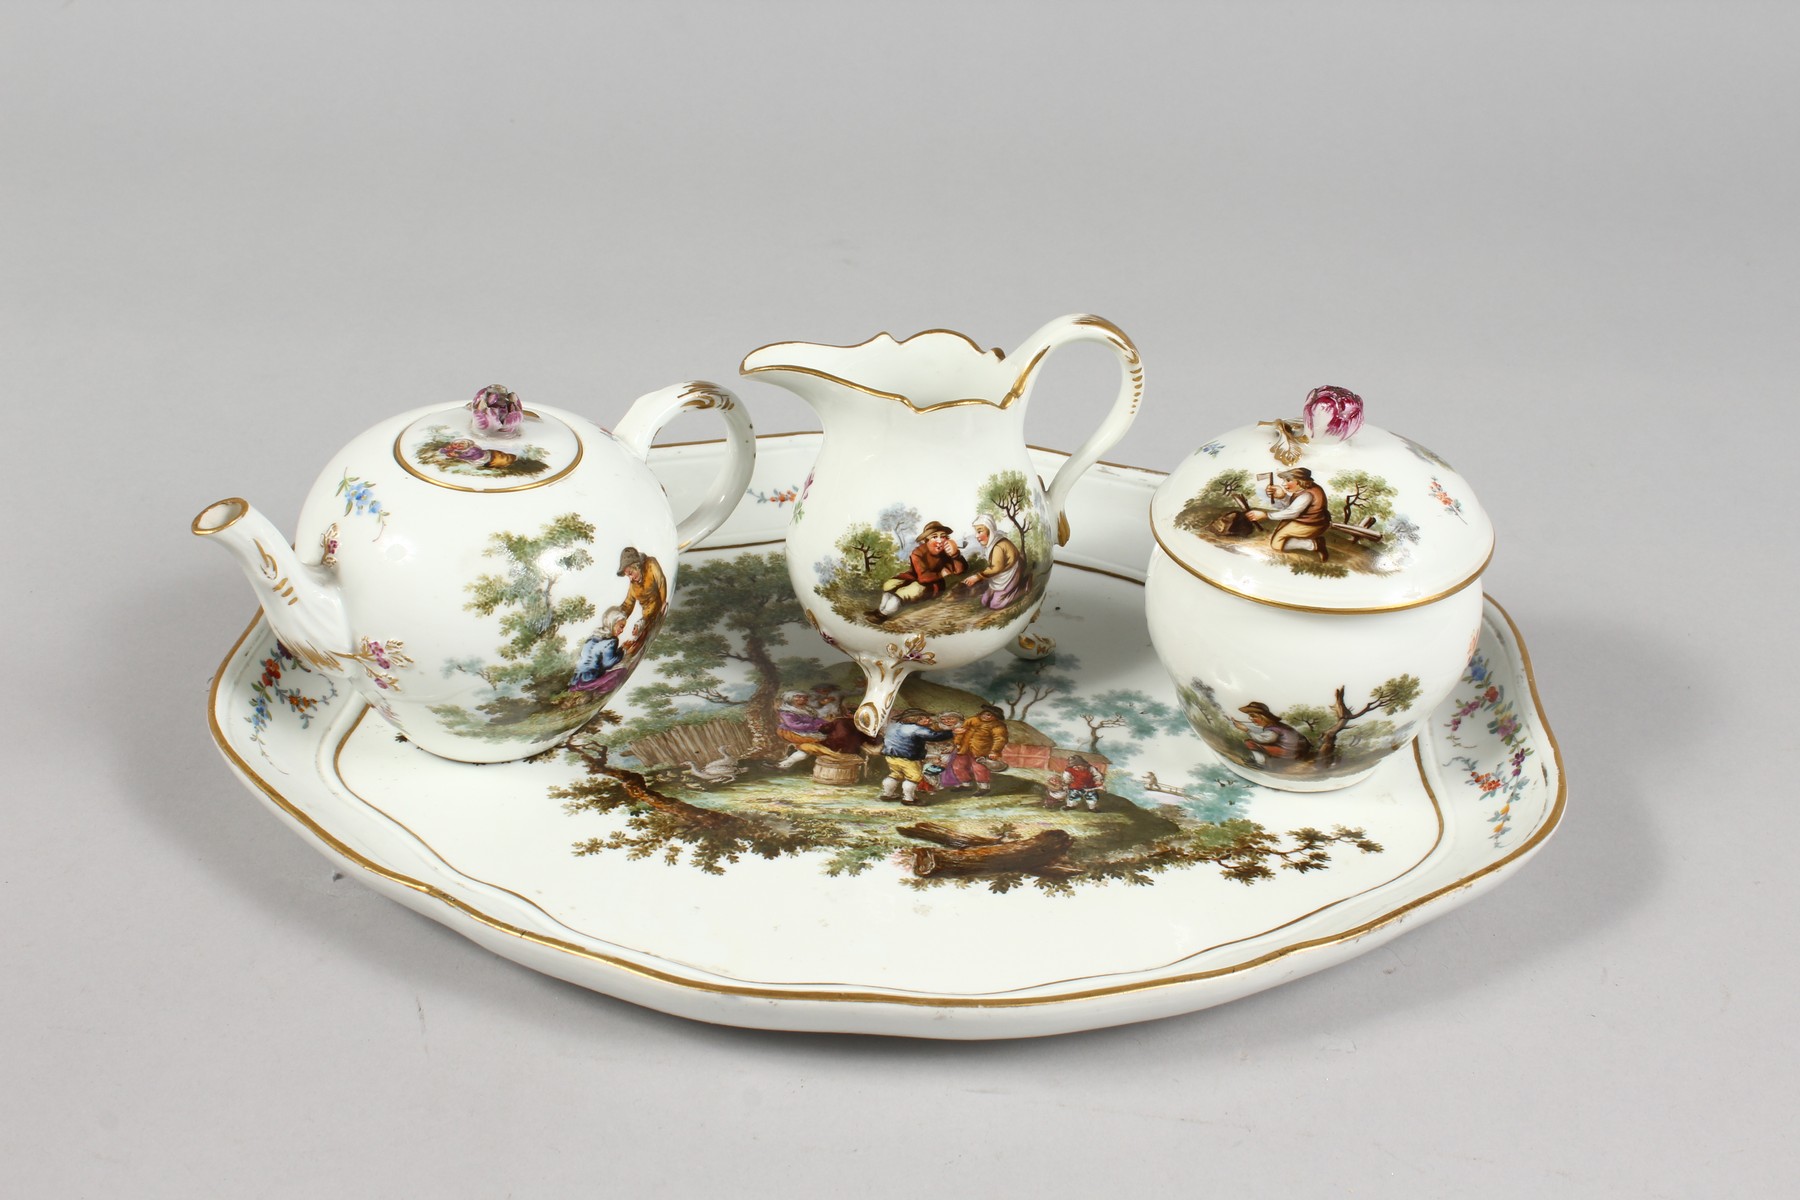 A SUPERB 18TH CENTURY MEISSEN PORCELAIN FOUR PIECE CABARET SET, with oval tray, teapot and cover, - Image 2 of 15